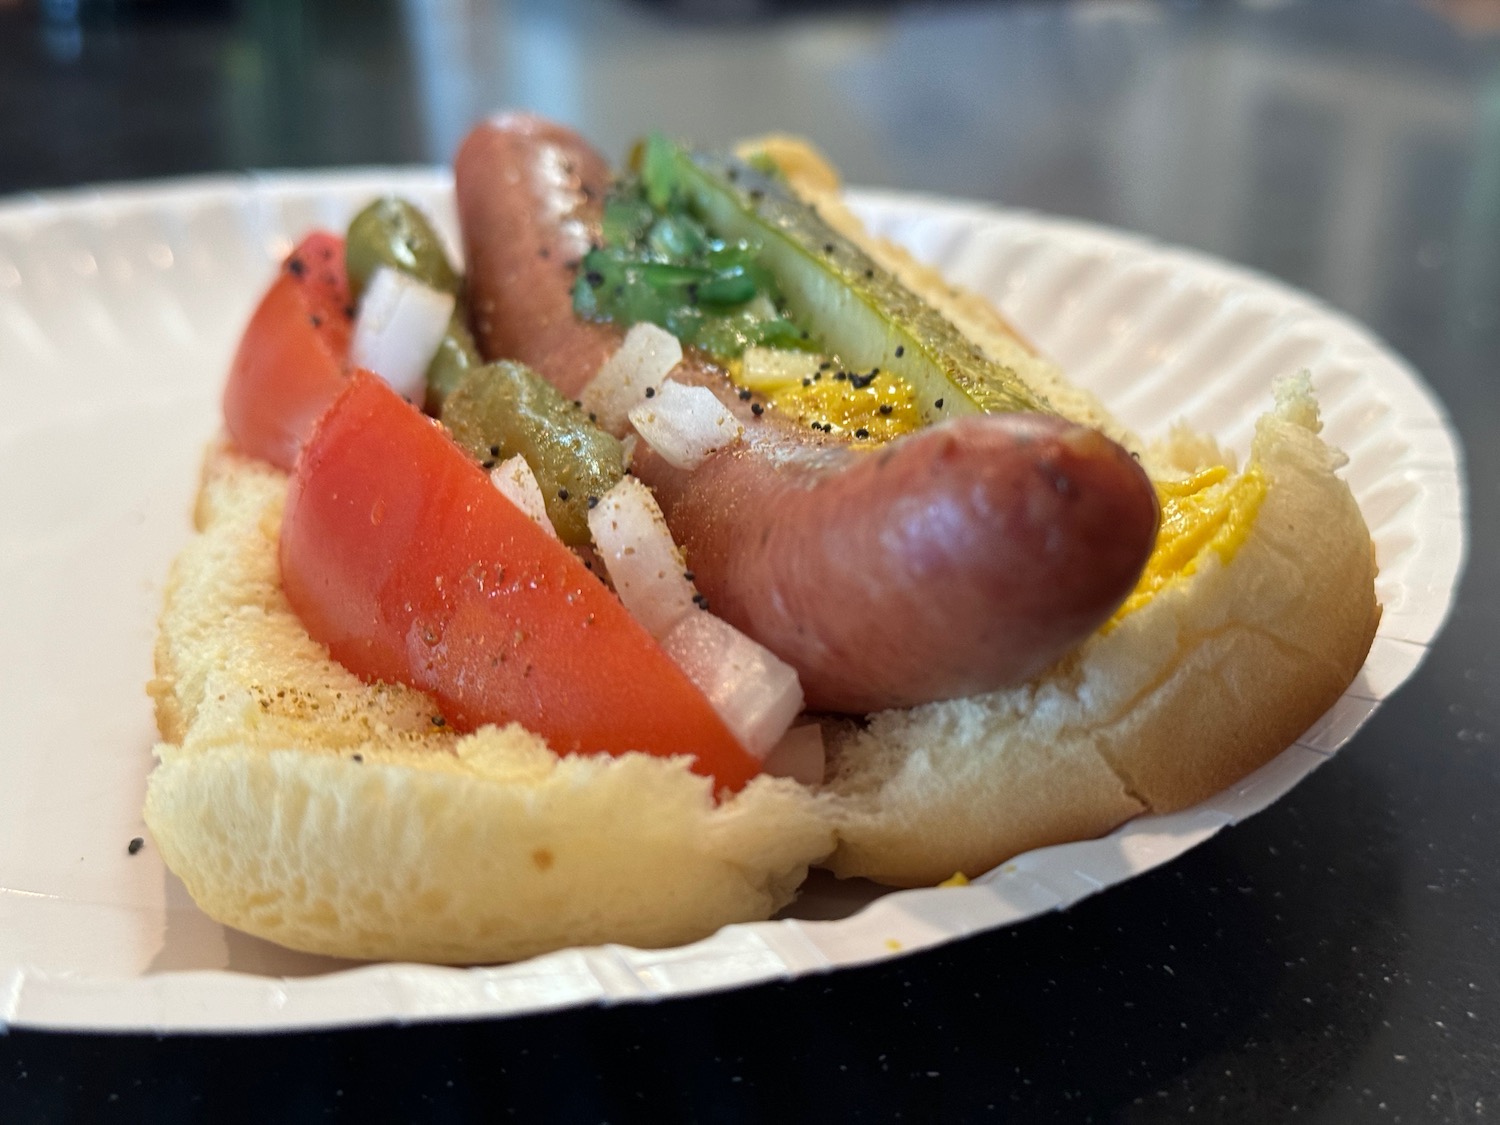 a hot dog with vegetables on a paper plate